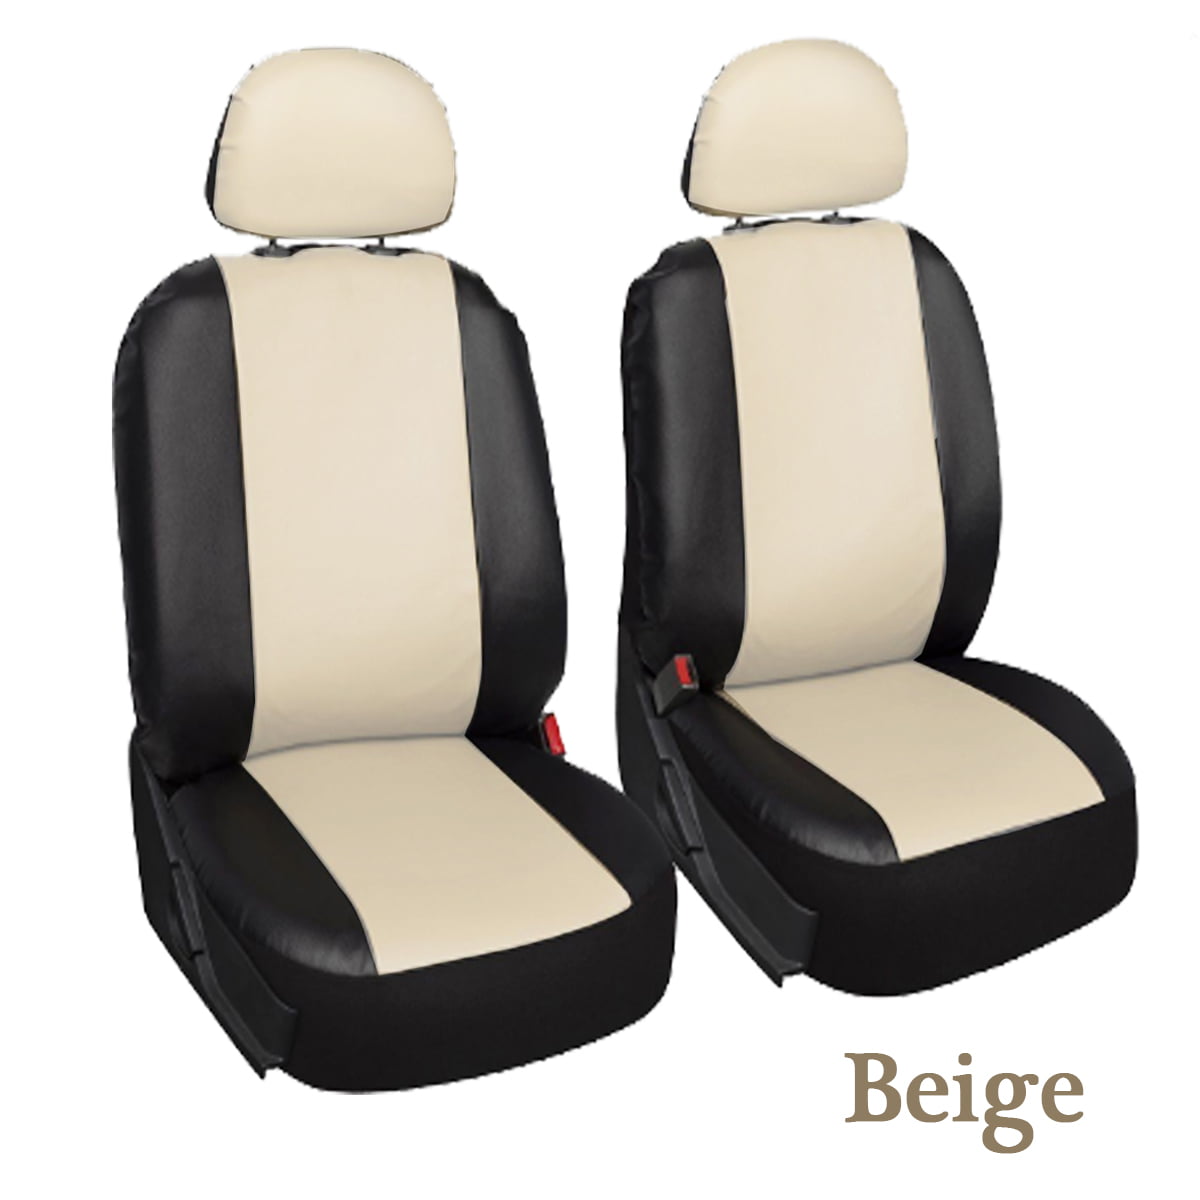 2 Pcs Breathable High Back Bucket Car Seat Cover Front Durable PU Leather Fabric